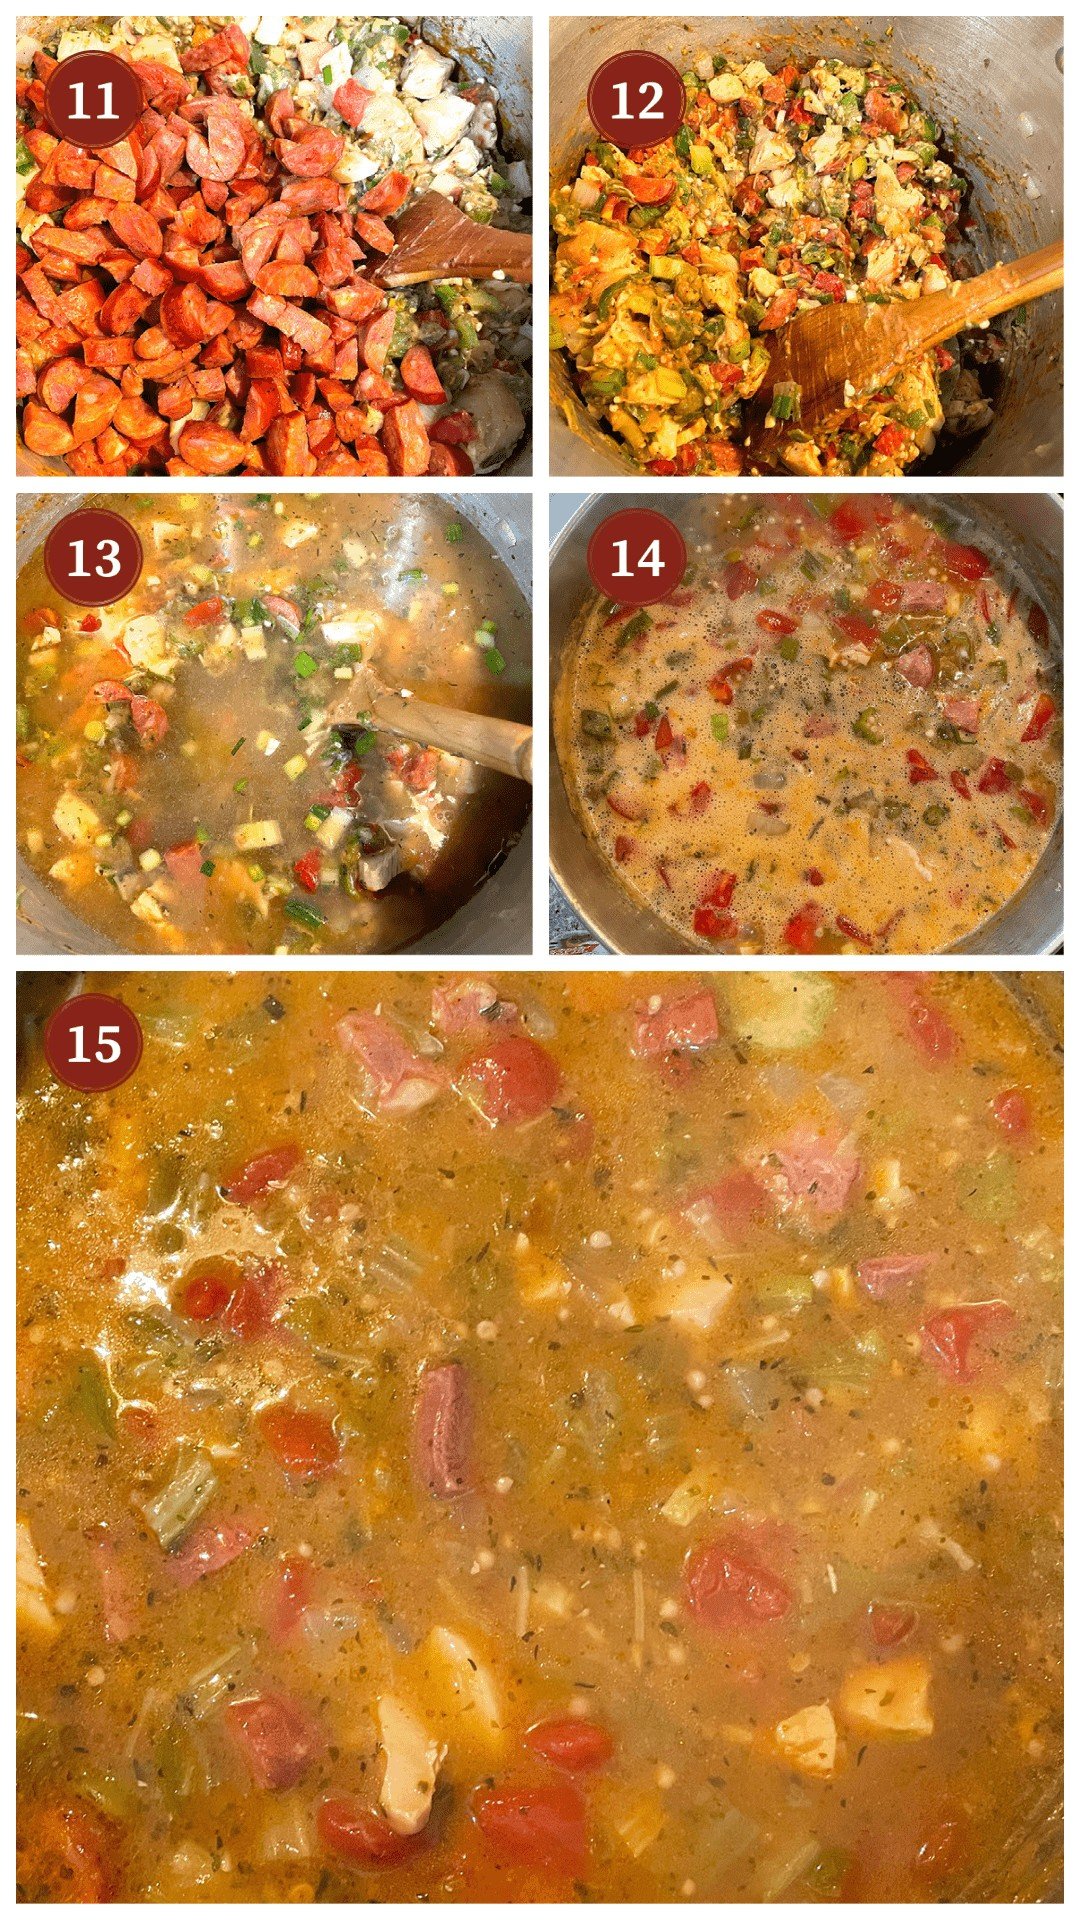 A collage of images showing how to make chicken and sausage gumbo, steps 11 - 15.